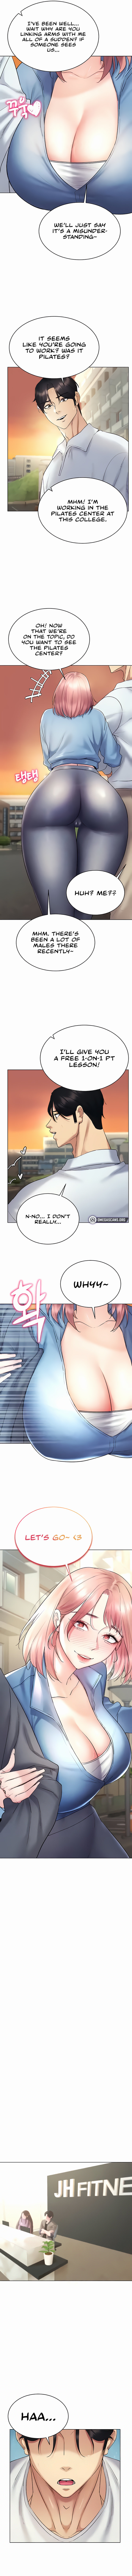 Using Eroge Abilities In Real Life - Chapter 14 Page 9